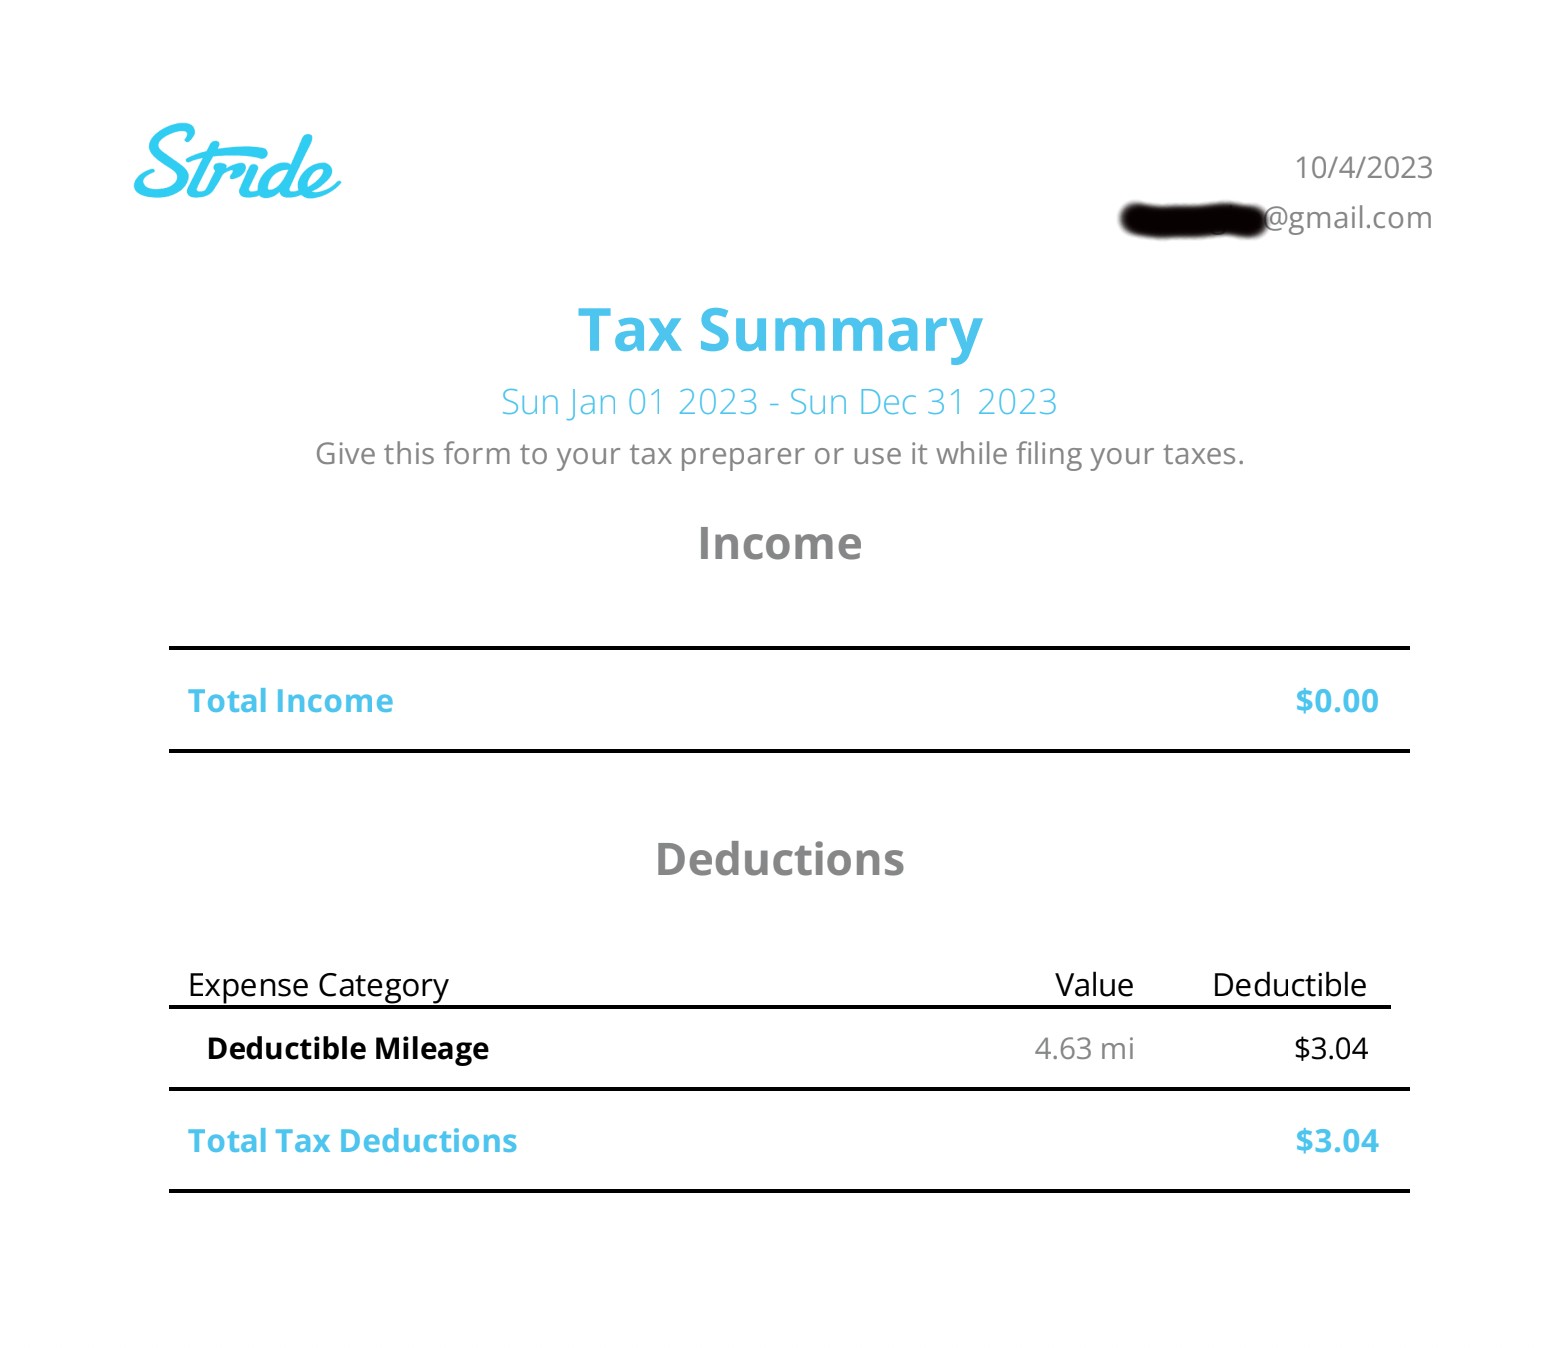 the stride app emails you your deductible miles report